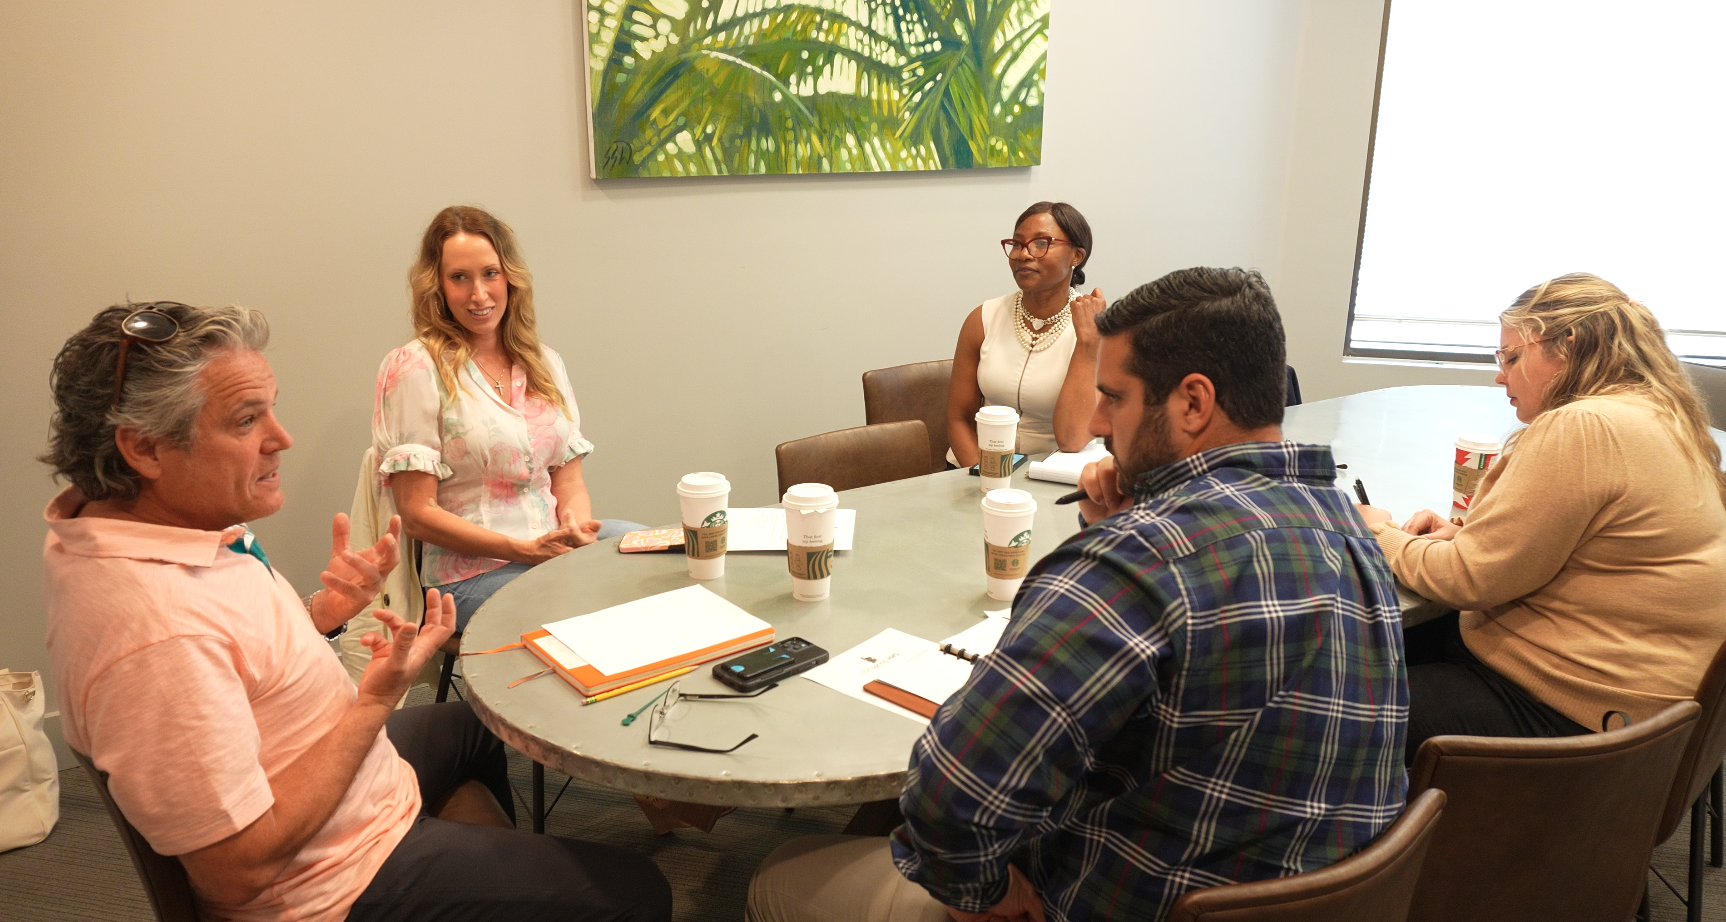 VMS mentees Stelios and Cristin Peterson get advice from mentors Buddy Cummings, Nikki Cummings, and Jessica Griffen.